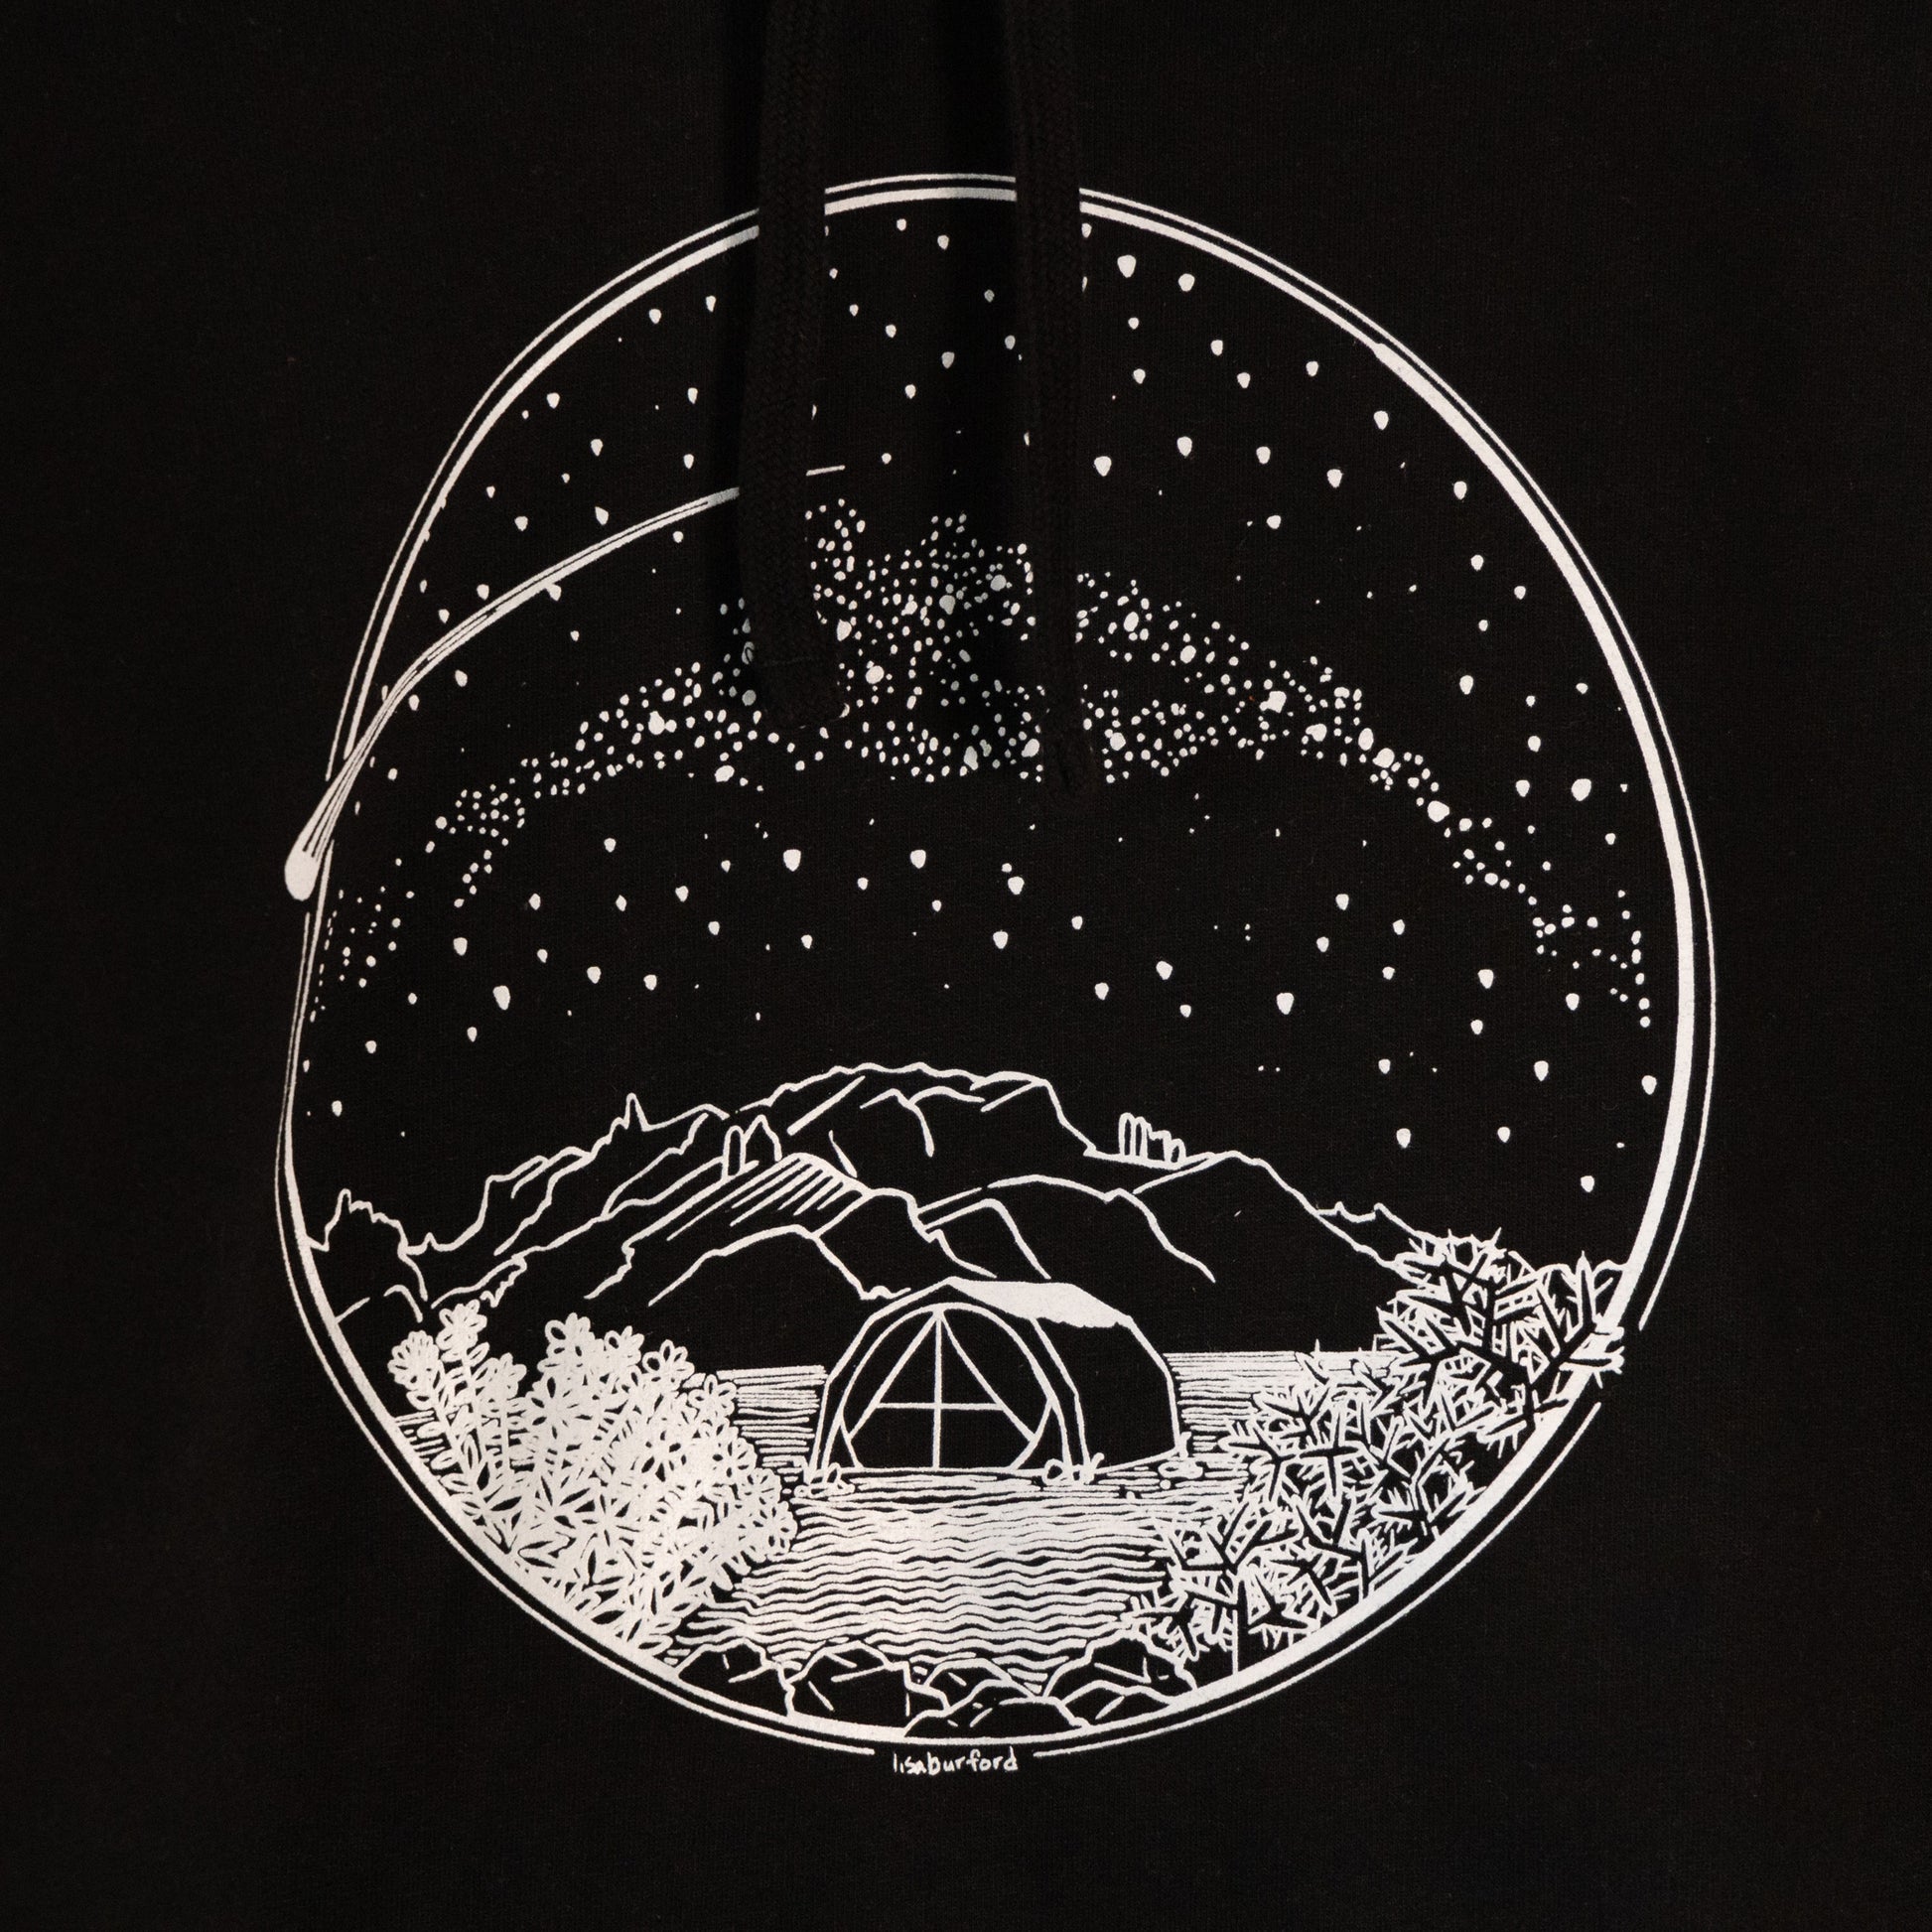 A close up of the design found on the hoodie. A white Desert Camping illustration on the front of the gender neutral black colored hooded sweatshirt. The illustration shows a tent in the foreground with mountains in the background, desert plants in the very foreground, and stars, the Milky Way gallaxy, and a shooting star in the sky above the tent. The design is encompassed in a circular shape.